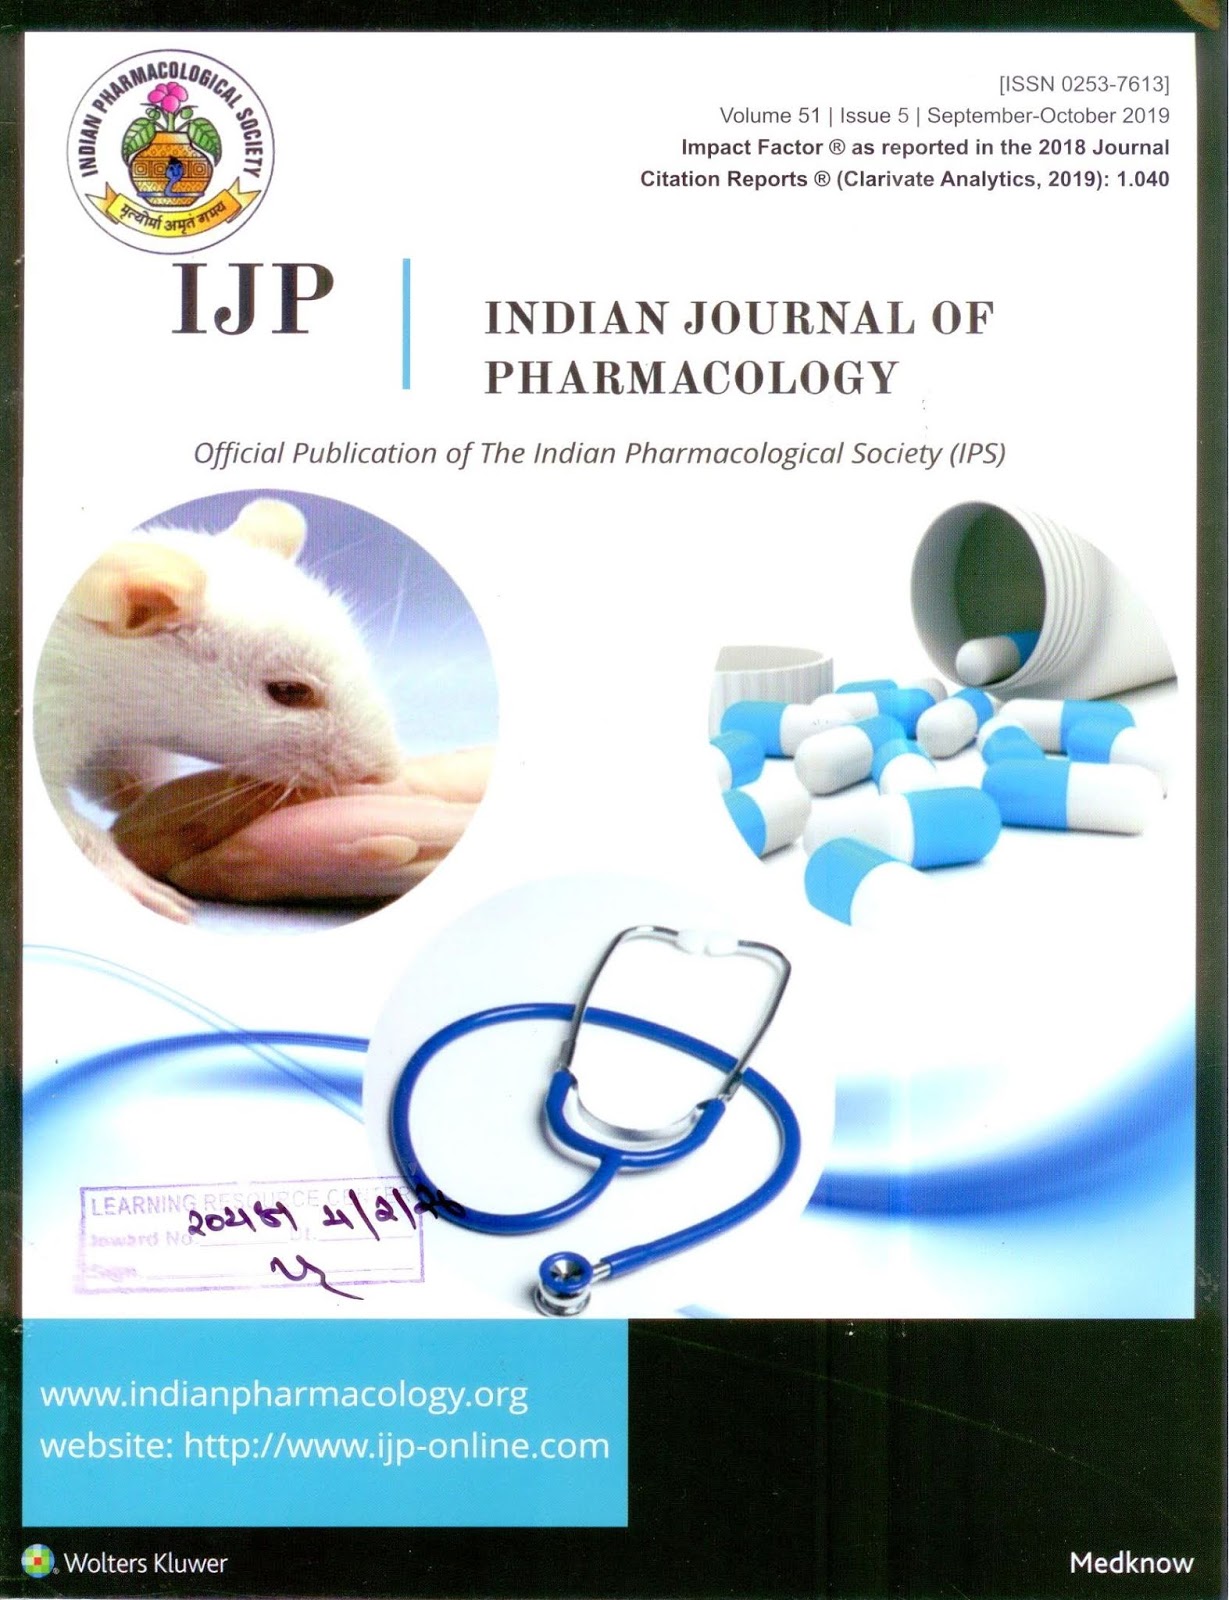 http://www.ijp-online.com/showBackIssue.asp?issn=0253-7613;year=2019;volume=51;issue=6;month=November-December